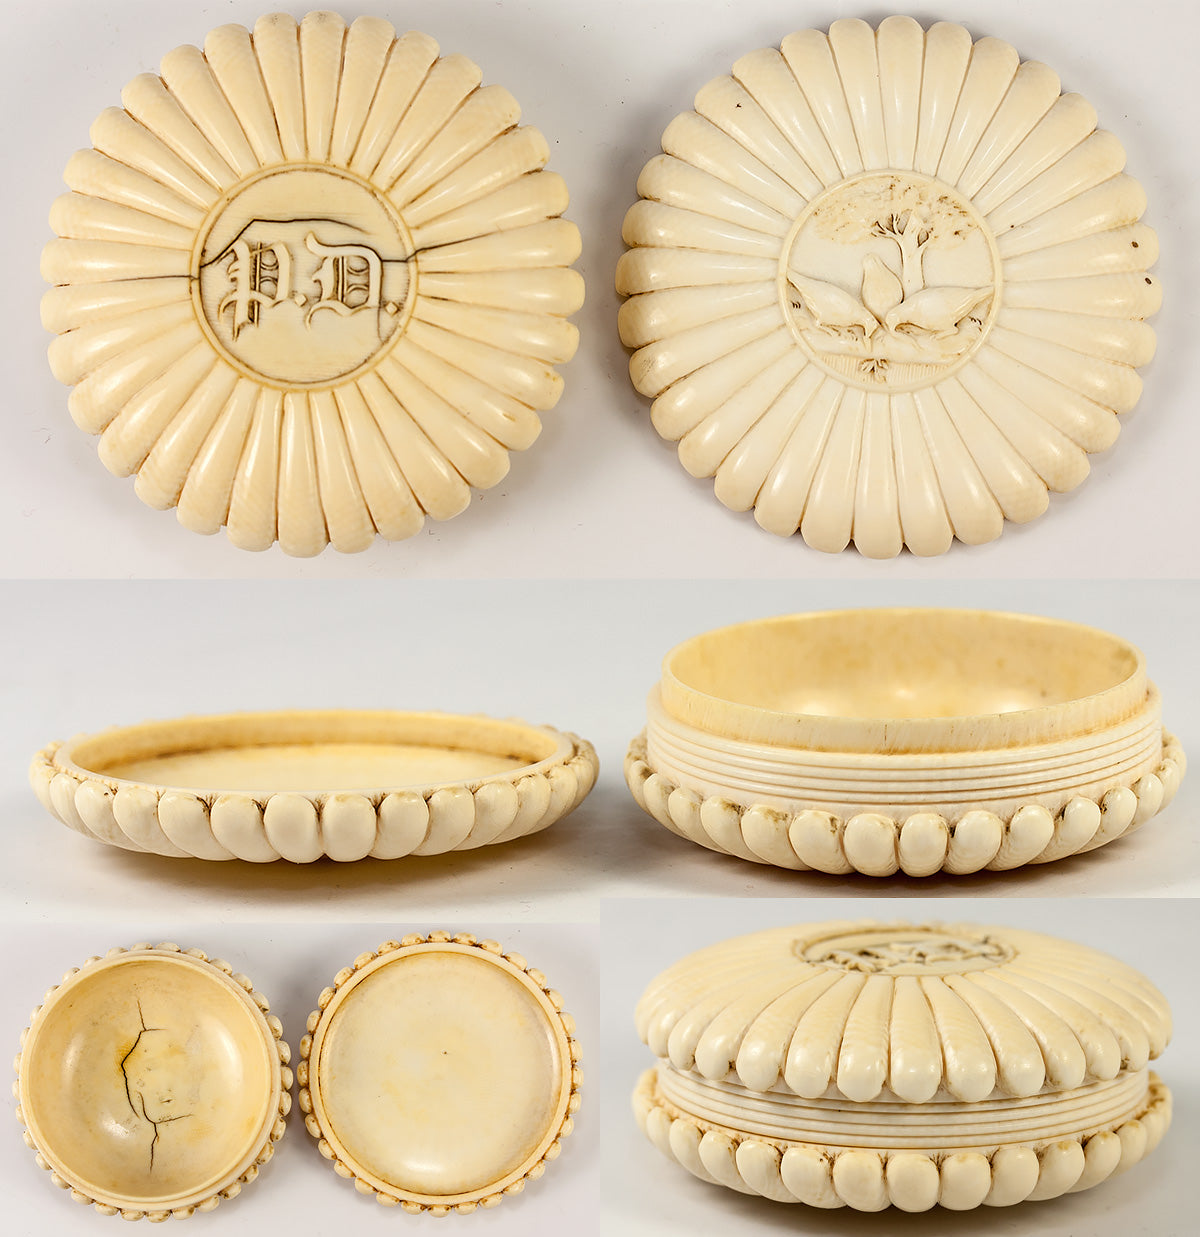 Precious 18th Century Dieppe Carved Ivory Snuff or Patch Box, Ducks in Landscape